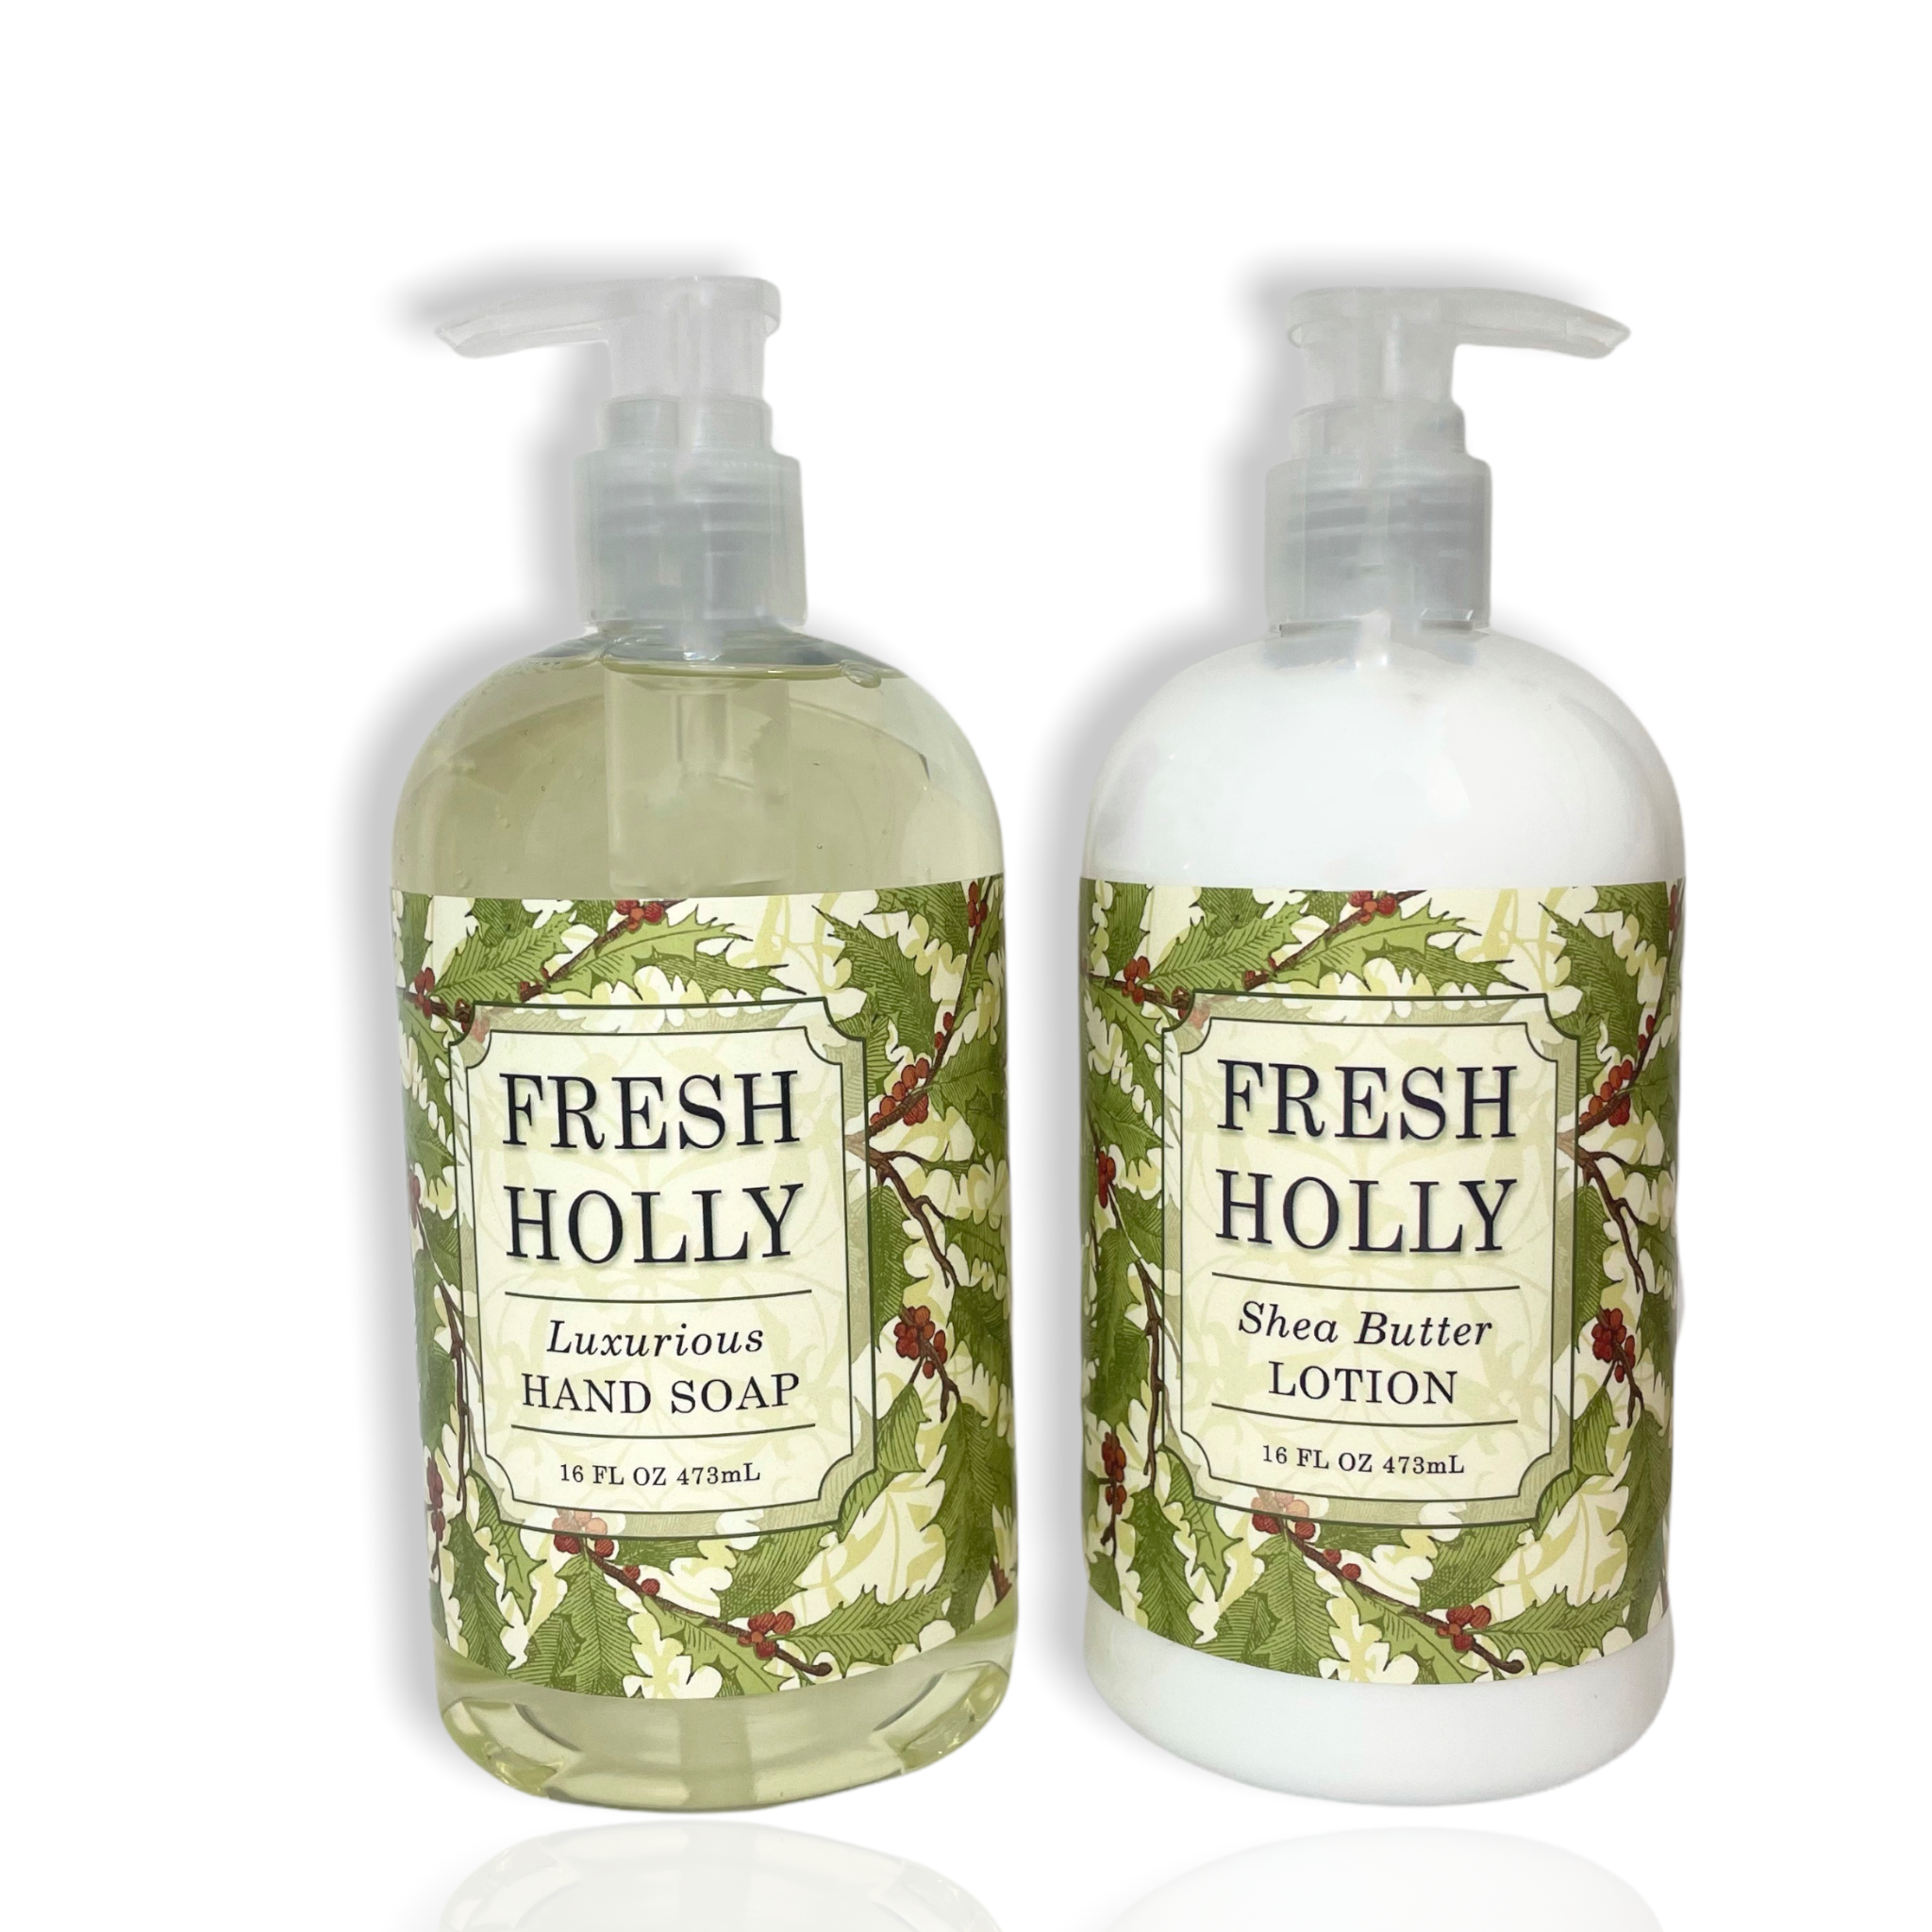 Greenwich Bay Trading Company Fresh Holly Collection